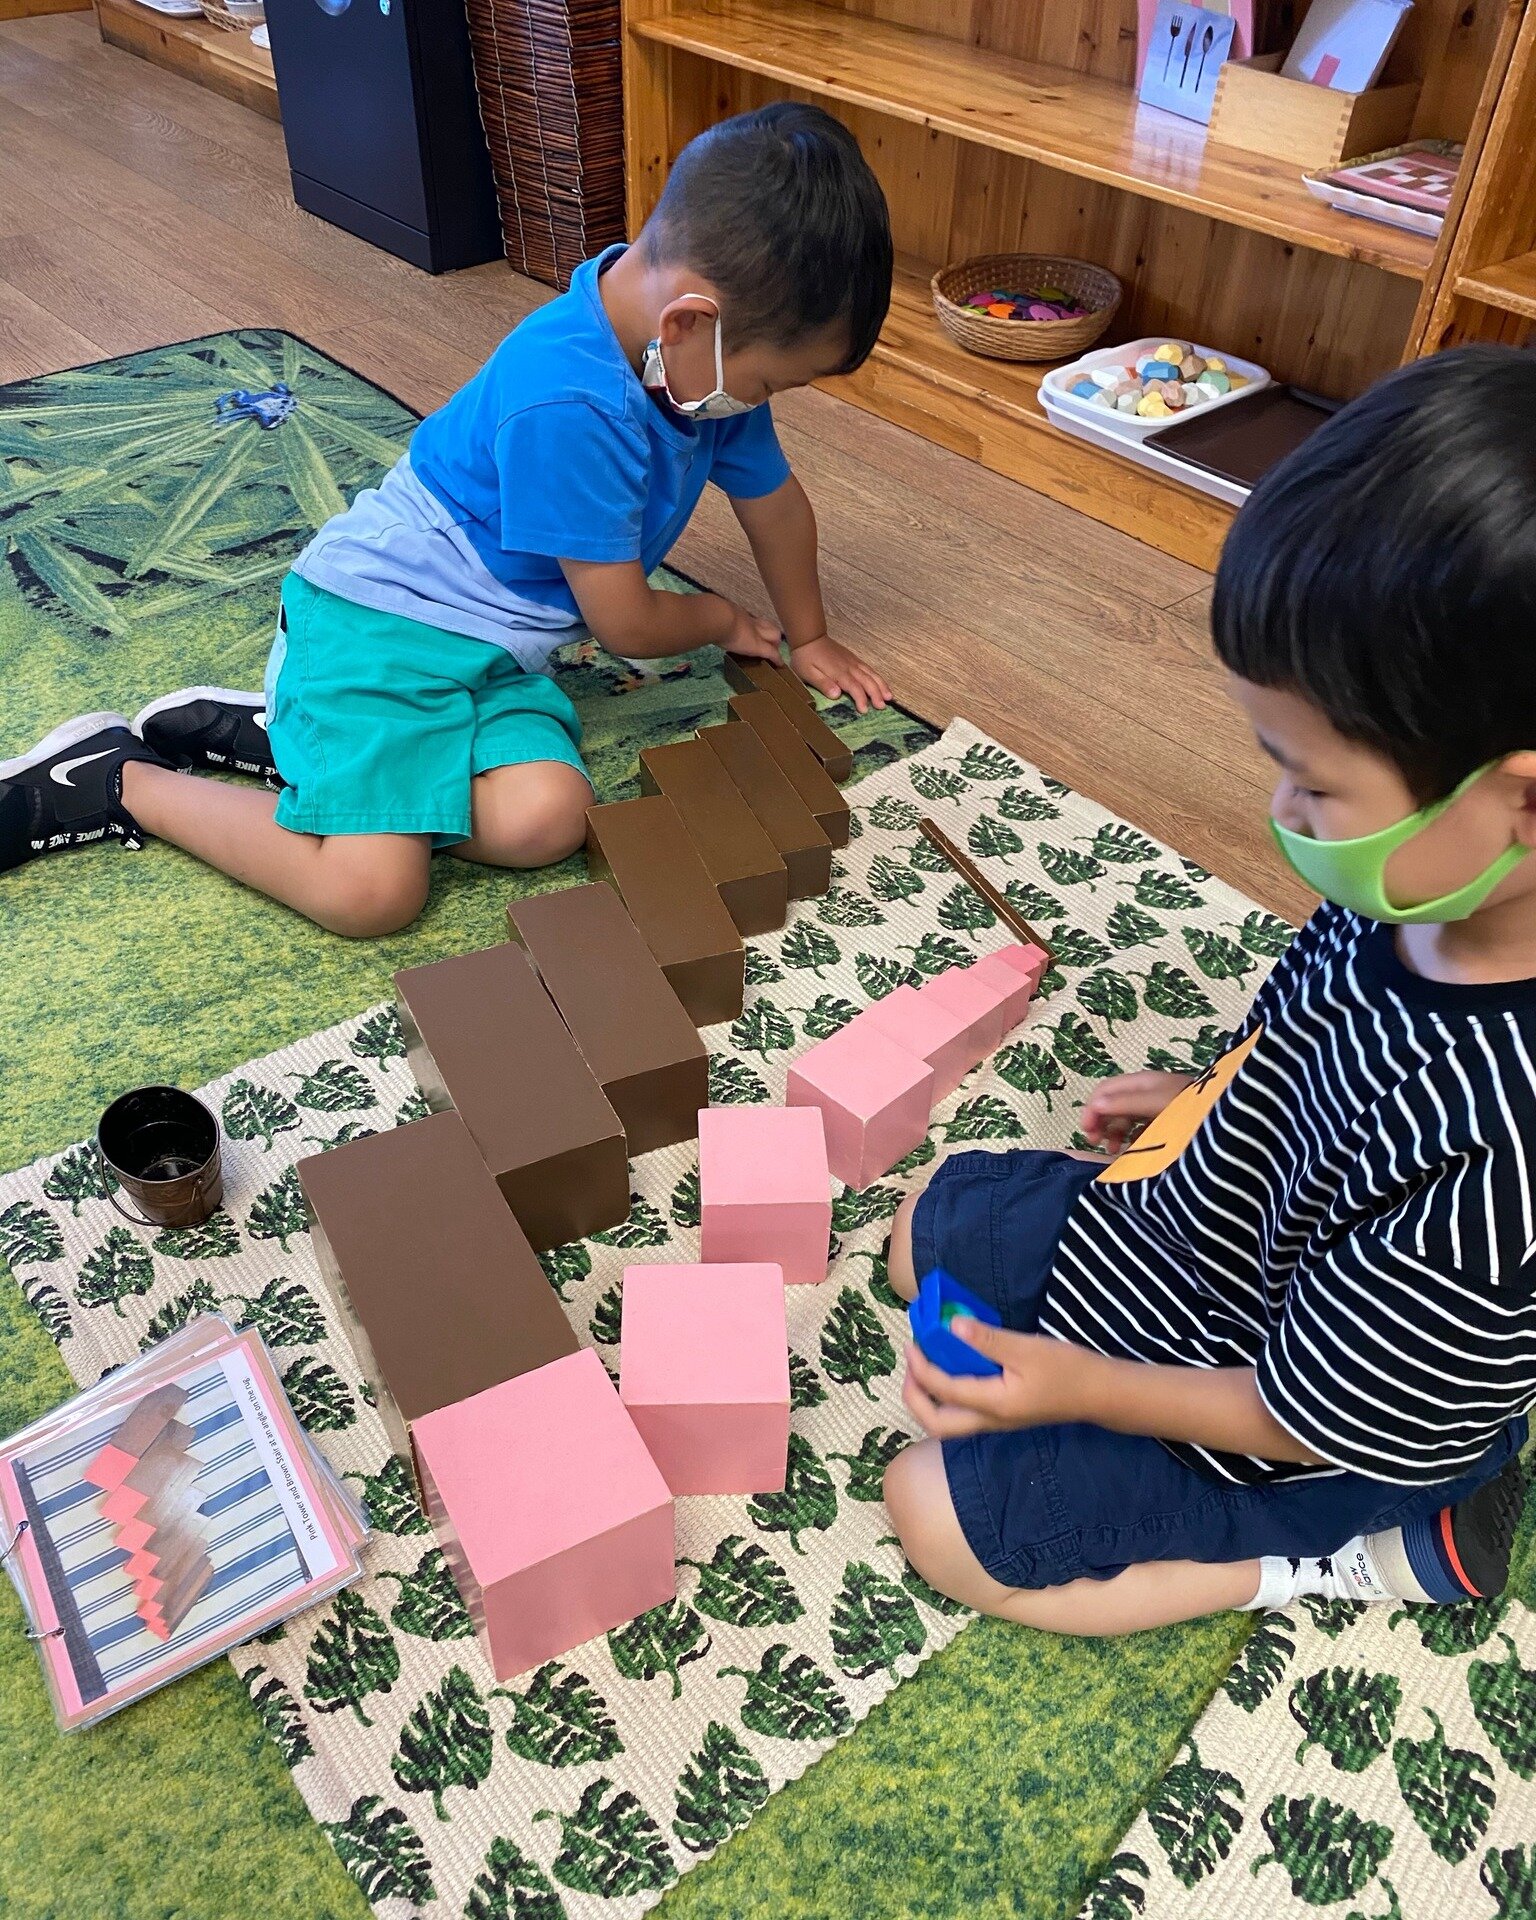 The Montessori pink tower and brown stairs are great for visual acuity. Students learn to distinguish the different sizes and practice sequencing the blocks. They can inspect the weight, length and width of the blocks.

#montessorimaterial #pinktower